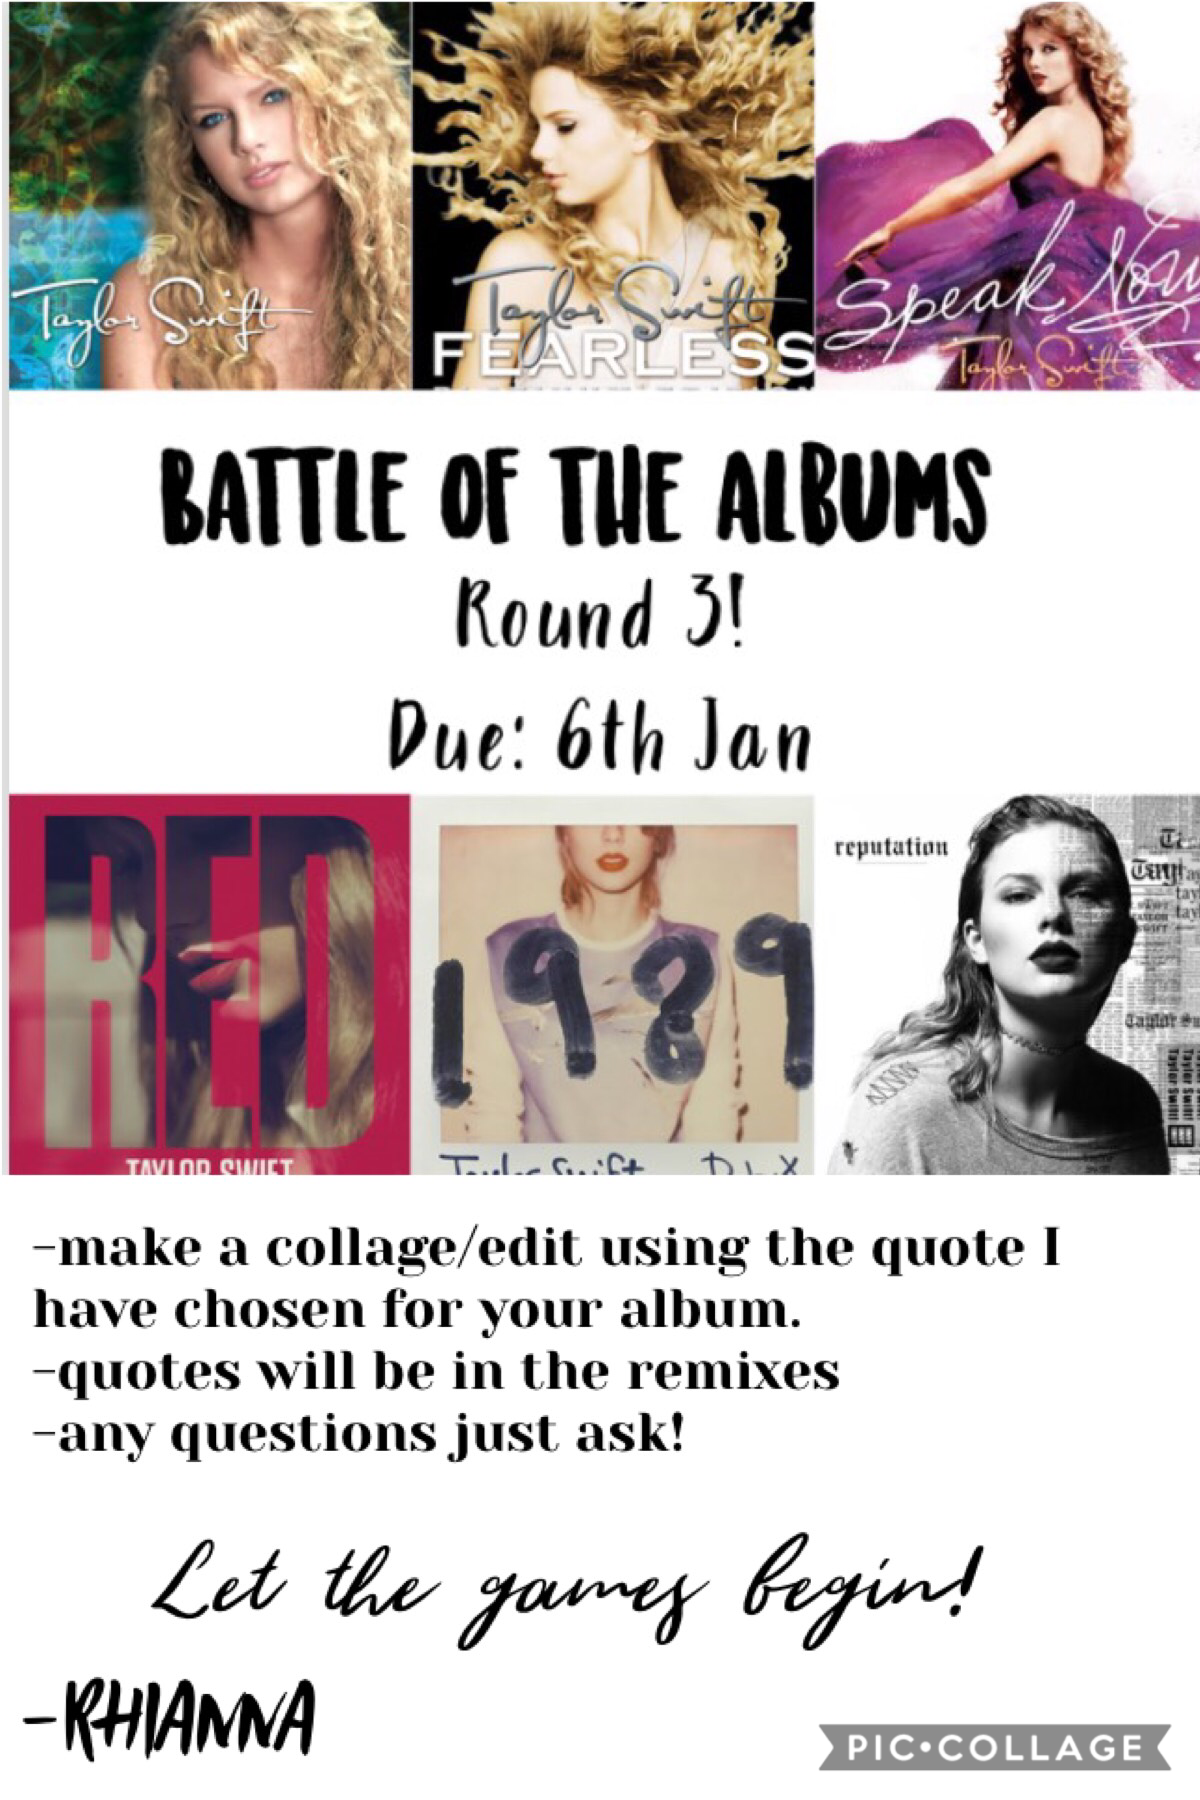 Round 3! Ends 6th January!